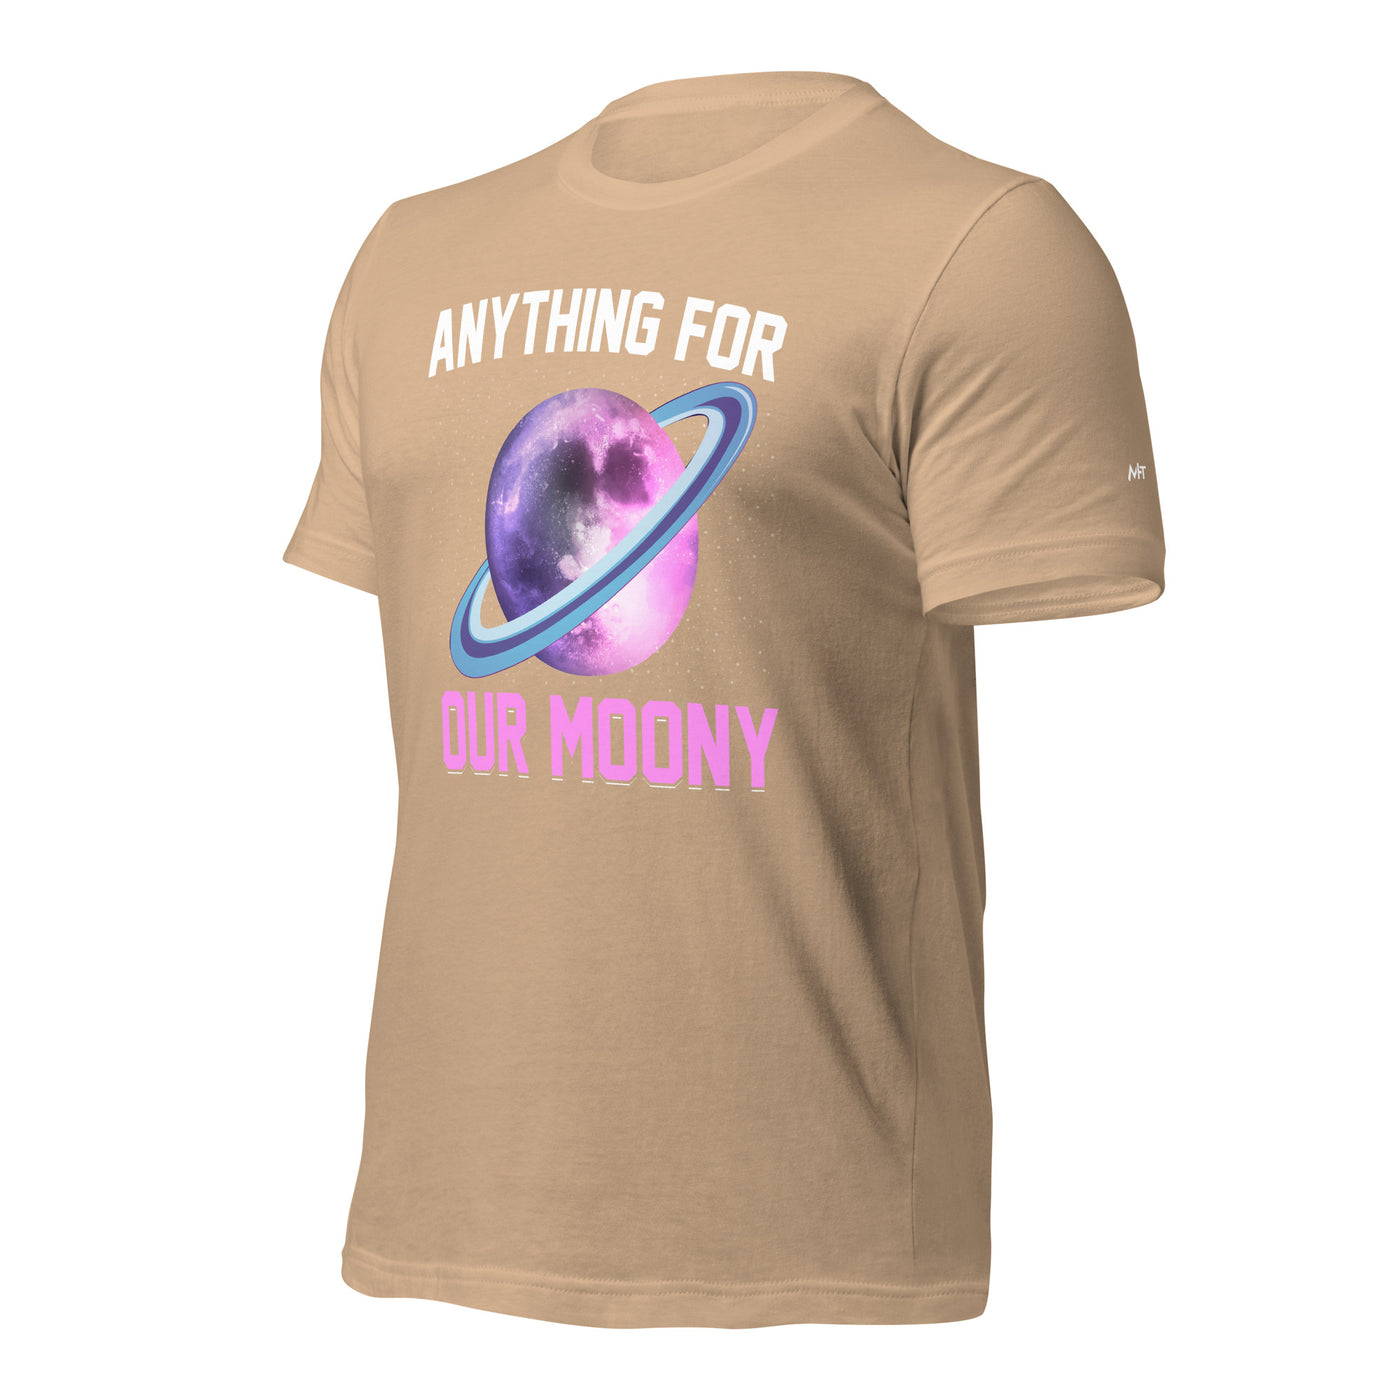 Anything for our moony - Unisex t-shirt